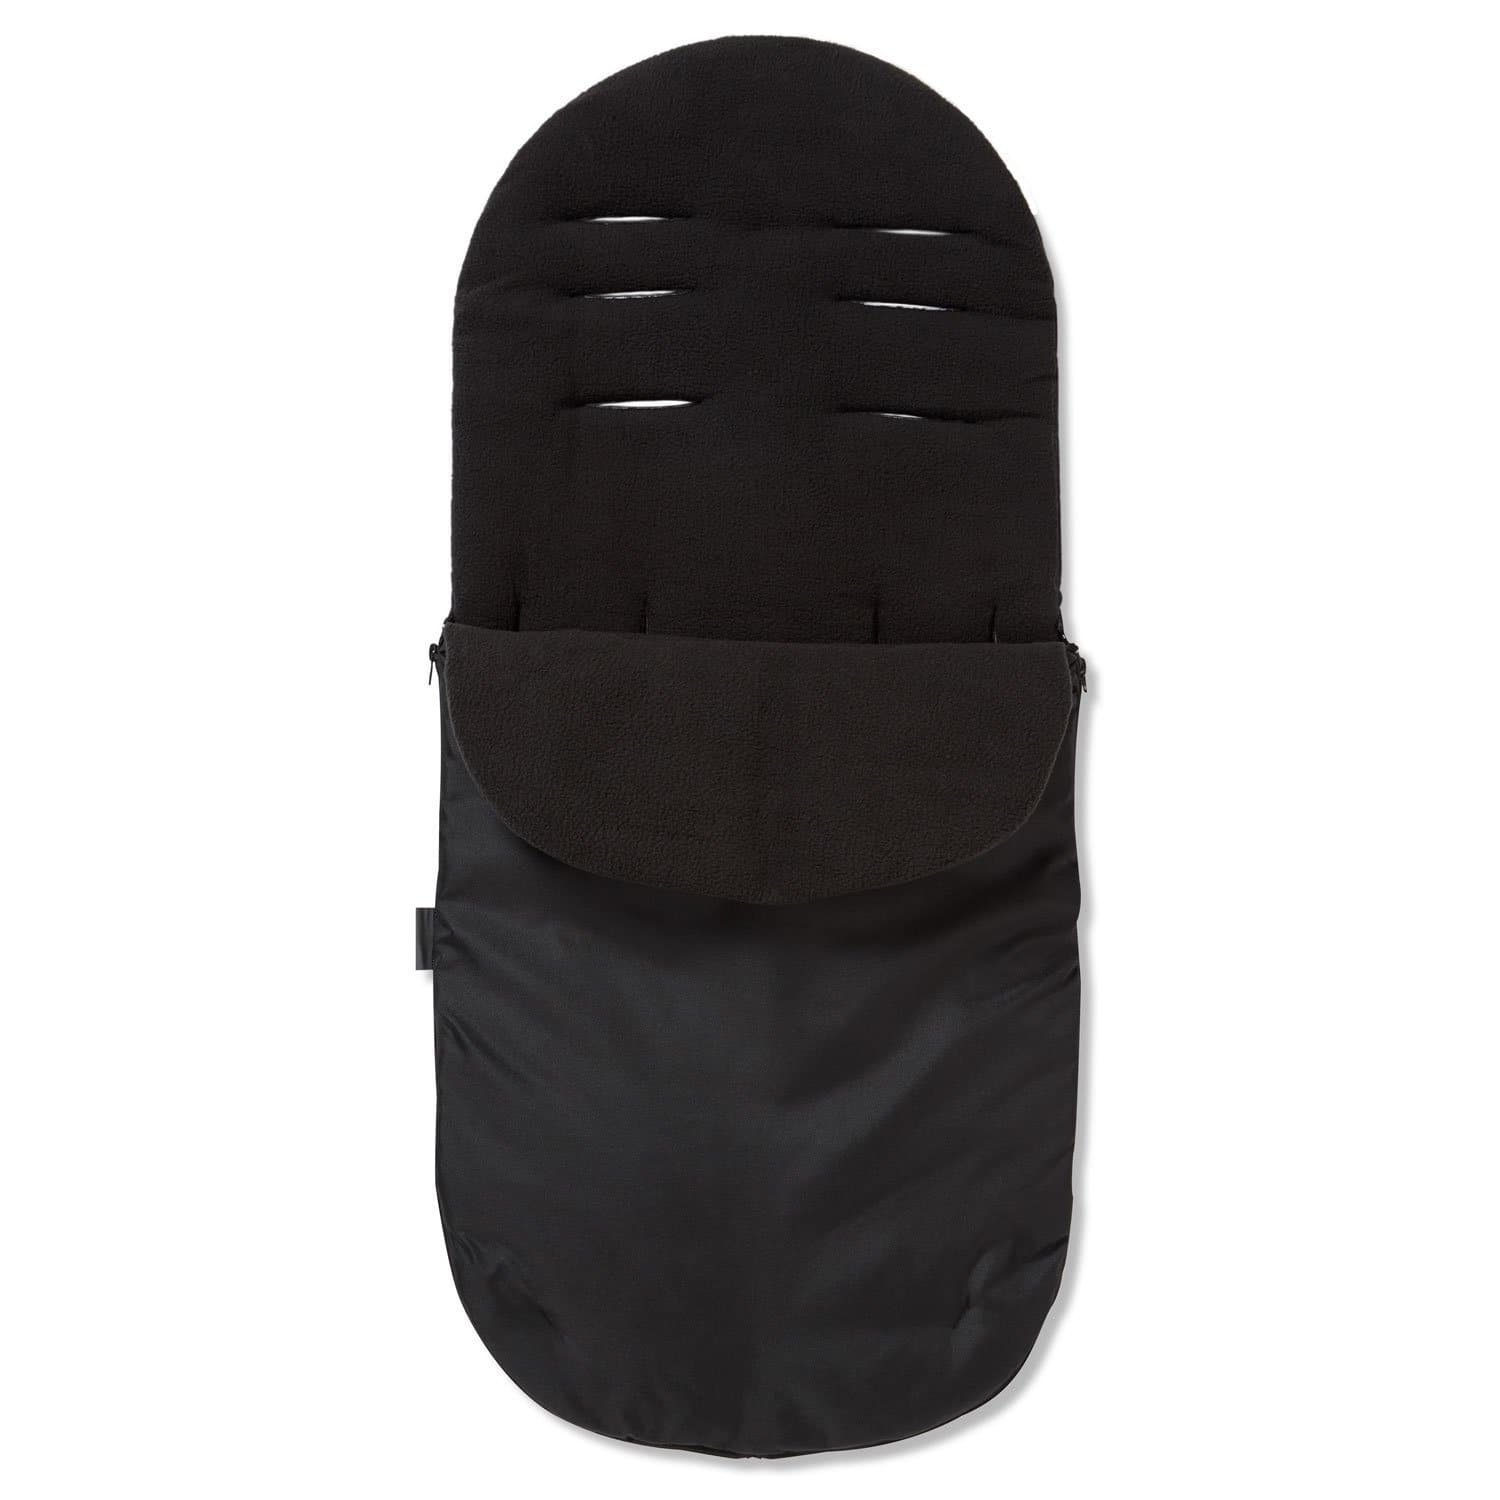 Footmuff / Cosy Toes Compatible with Bebe Confort - Black / Fits All Models | For Your Little One